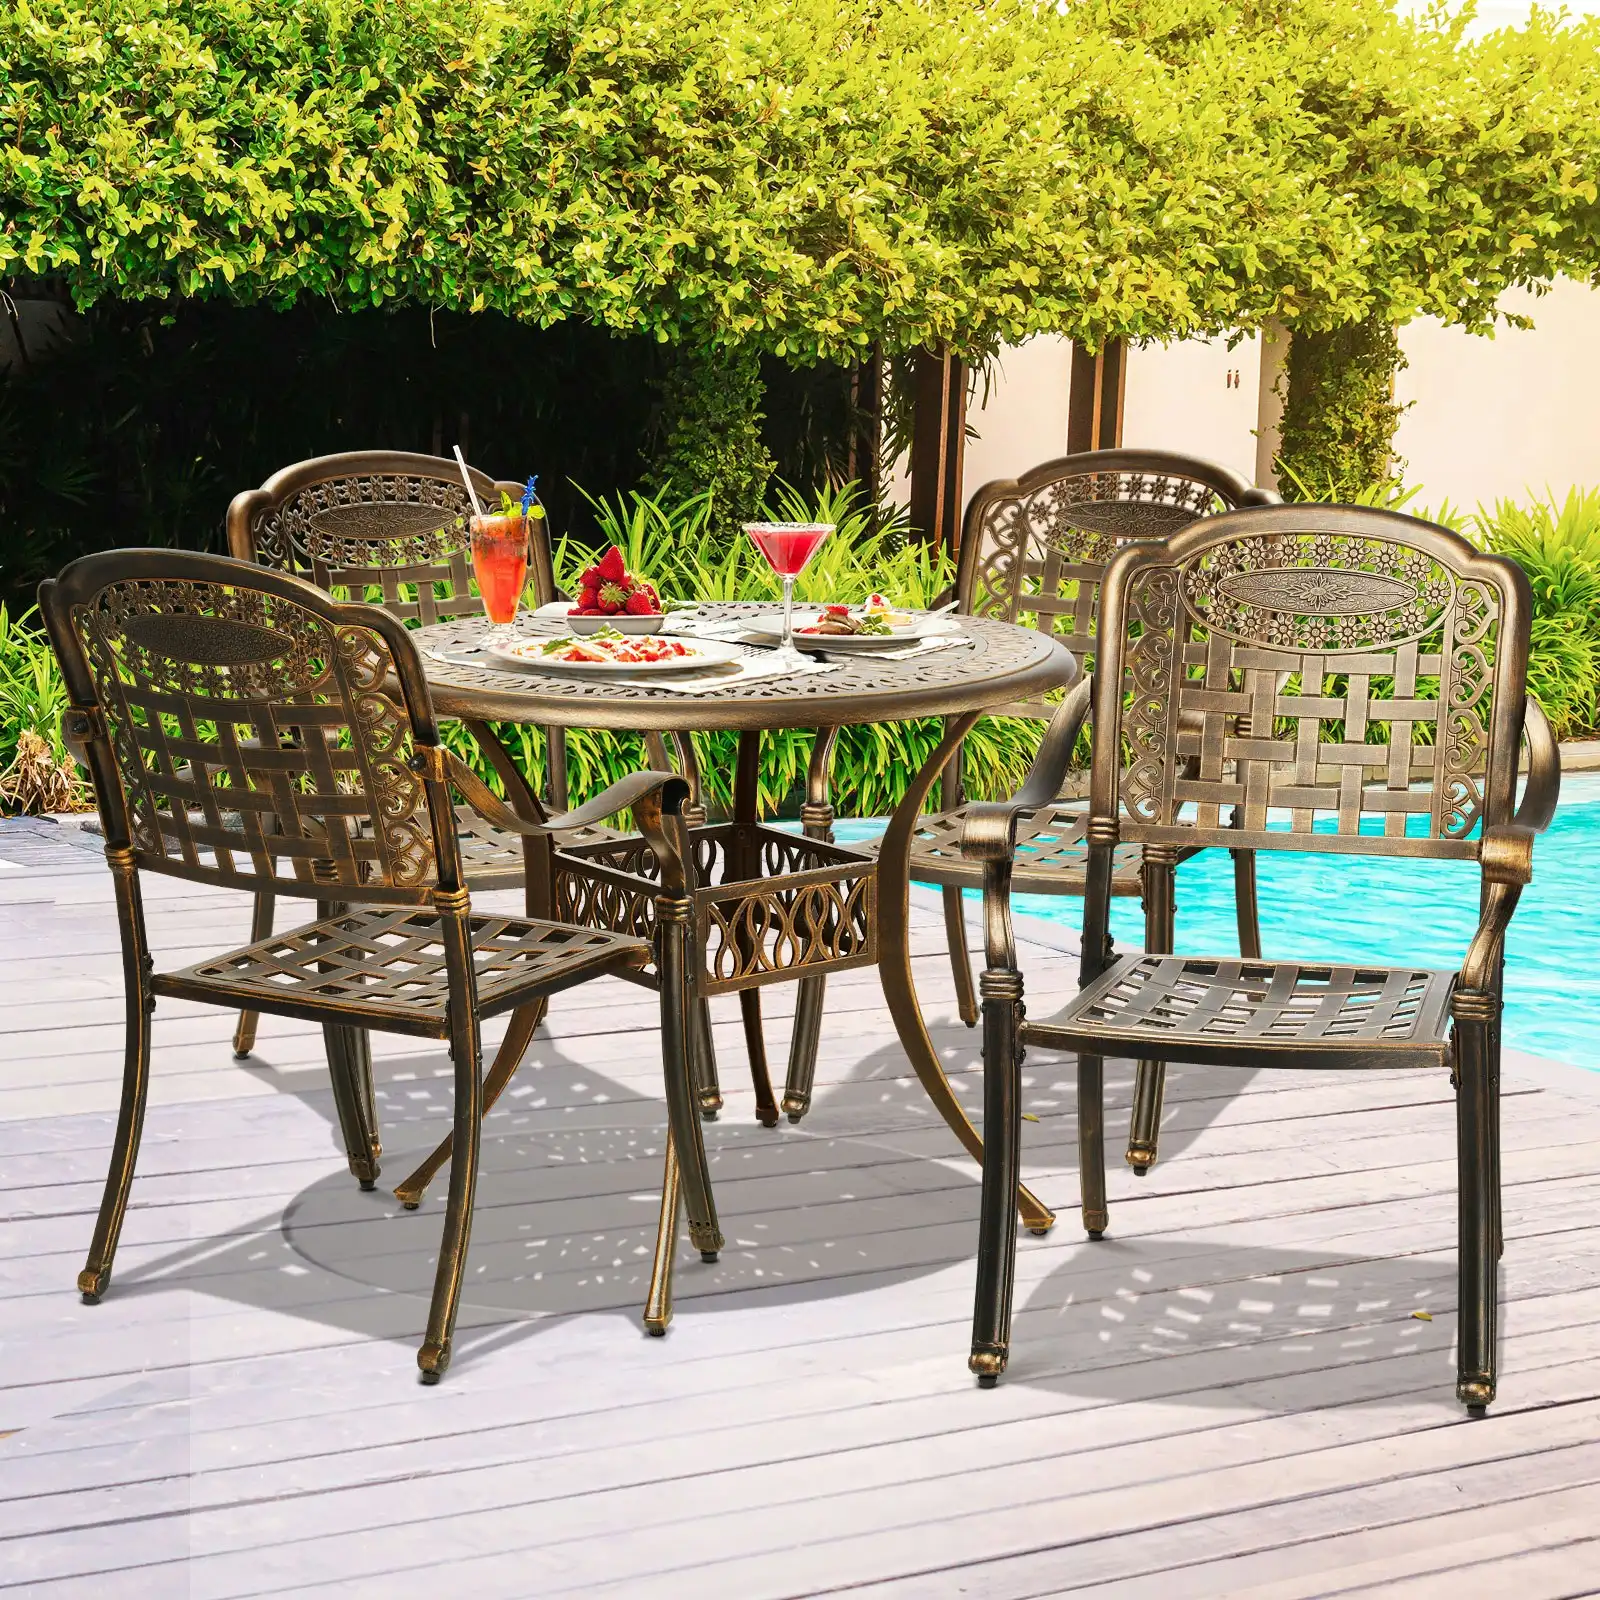 Livsip Outdoor Setting Dining Chairs Bistro Set Patio Garden Furniture 5 Piece